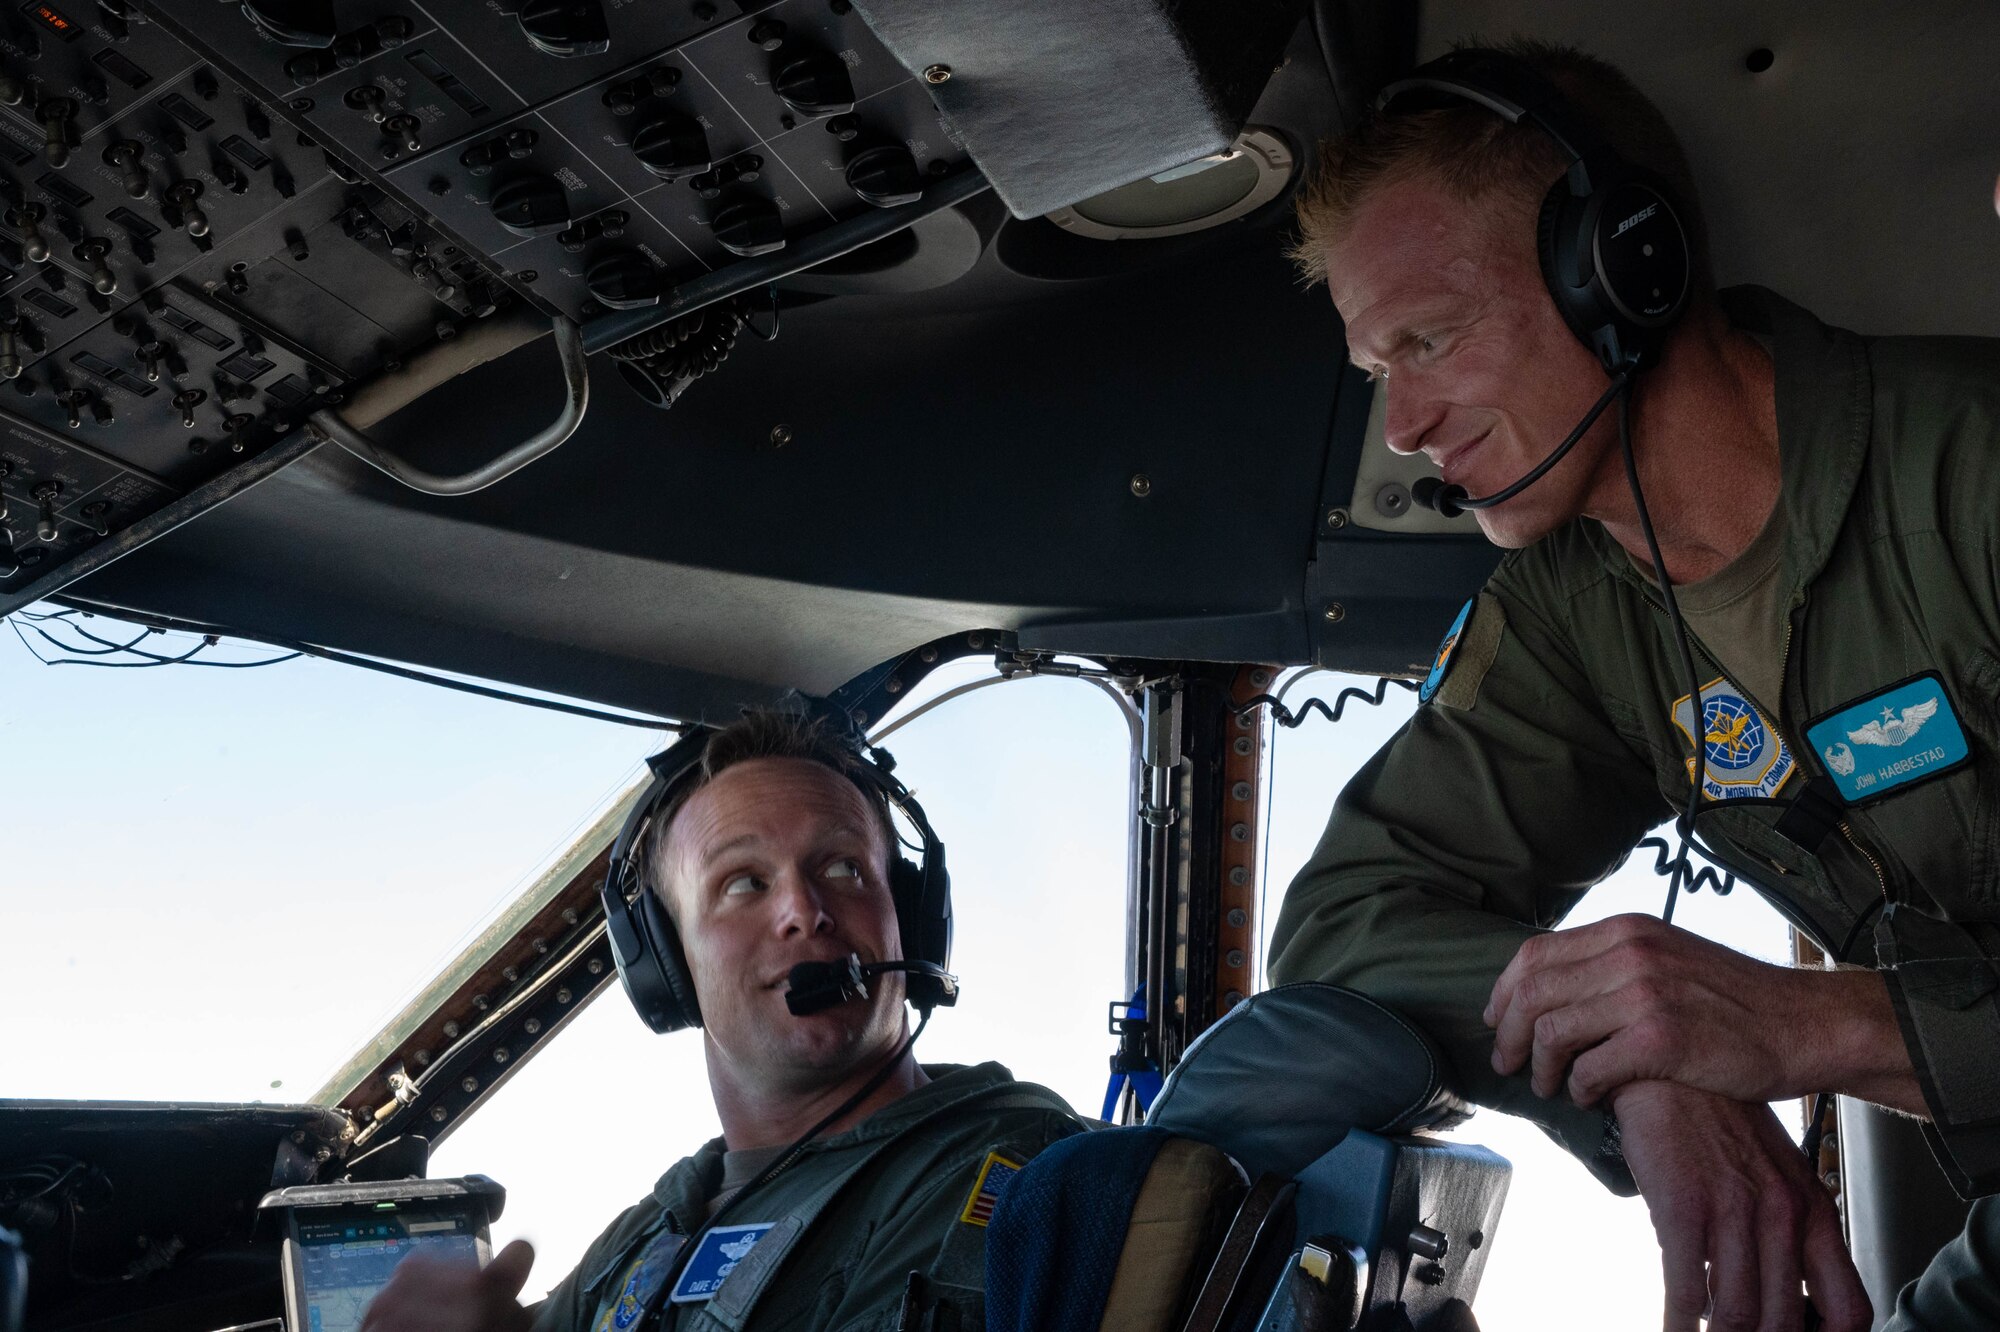 From the left, Lt. Cols. David Caswell, 9th Airlift Squadron pilot, and John Habbestad, 9th AS commander, discuss the flight path aboard a C-5M Super Galaxy over Delaware, June 23, 2021. This flight commemorated Habbestad’s final flight as the 9th AS commander. (U.S. Air Force photo by Senior Airman Faith Schaefer)